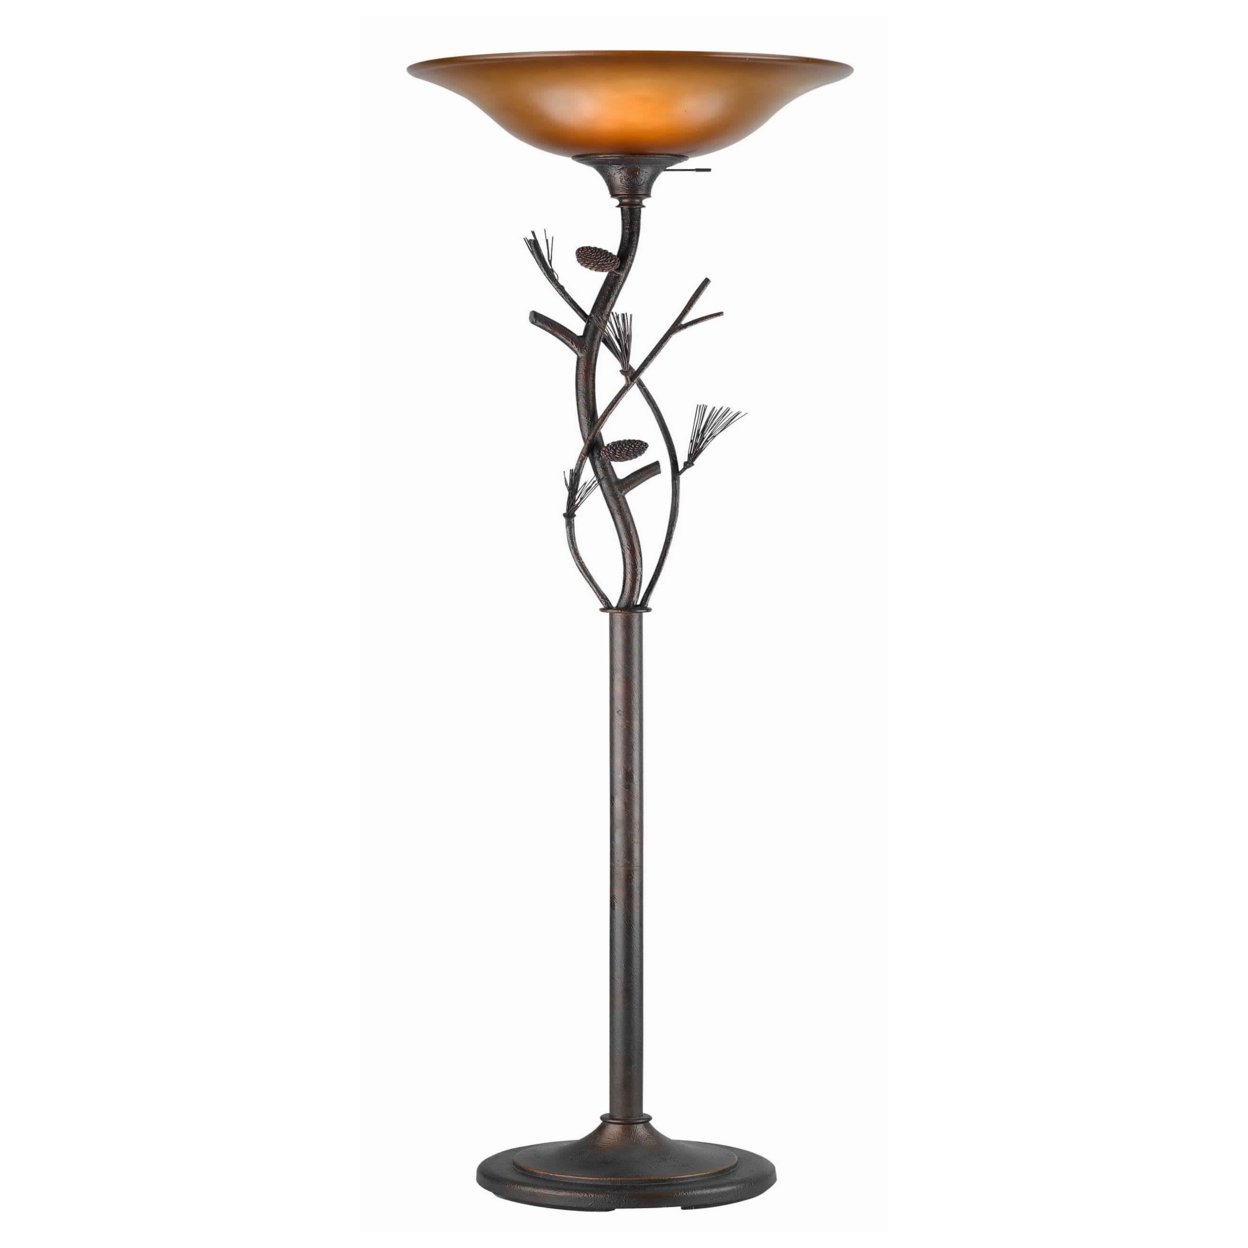 3 Way Glass Shade Torchiere Lamp With Pine And Twig Accents, Bronze- Saltoro Sherpi